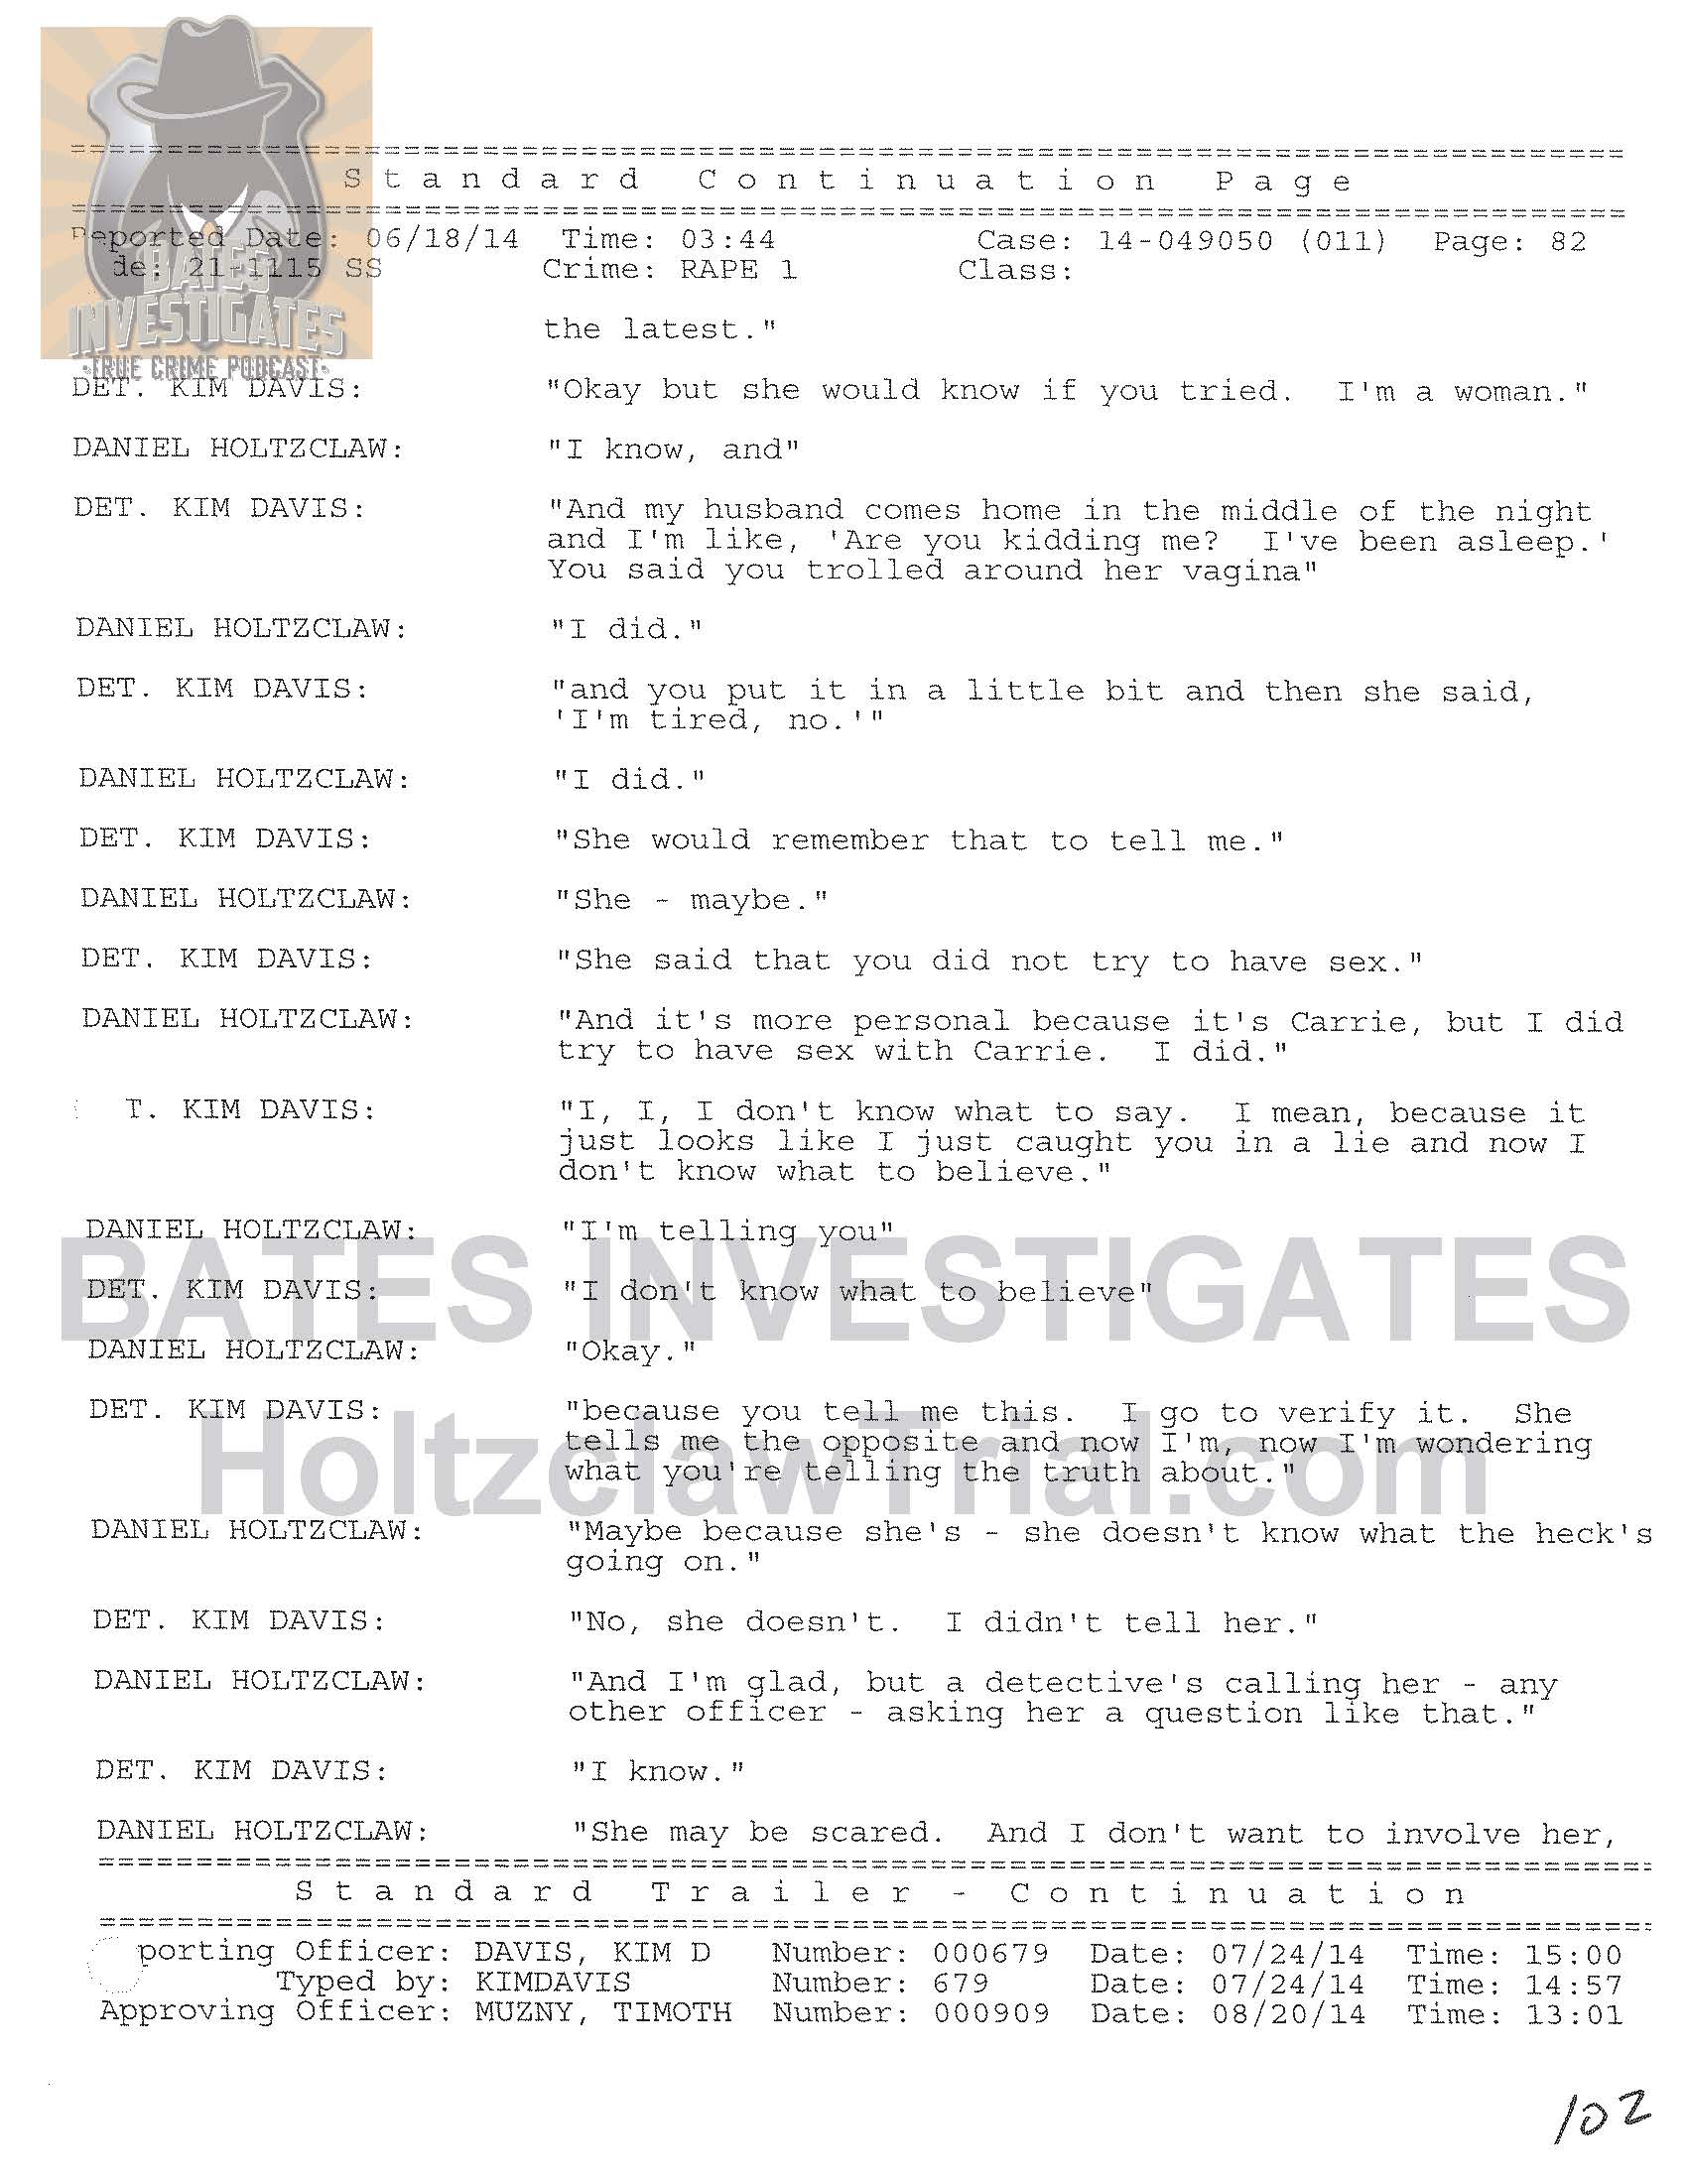 Holtzclaw Interrogation Transcript - Ep02 Redacted_Page_82.jpg